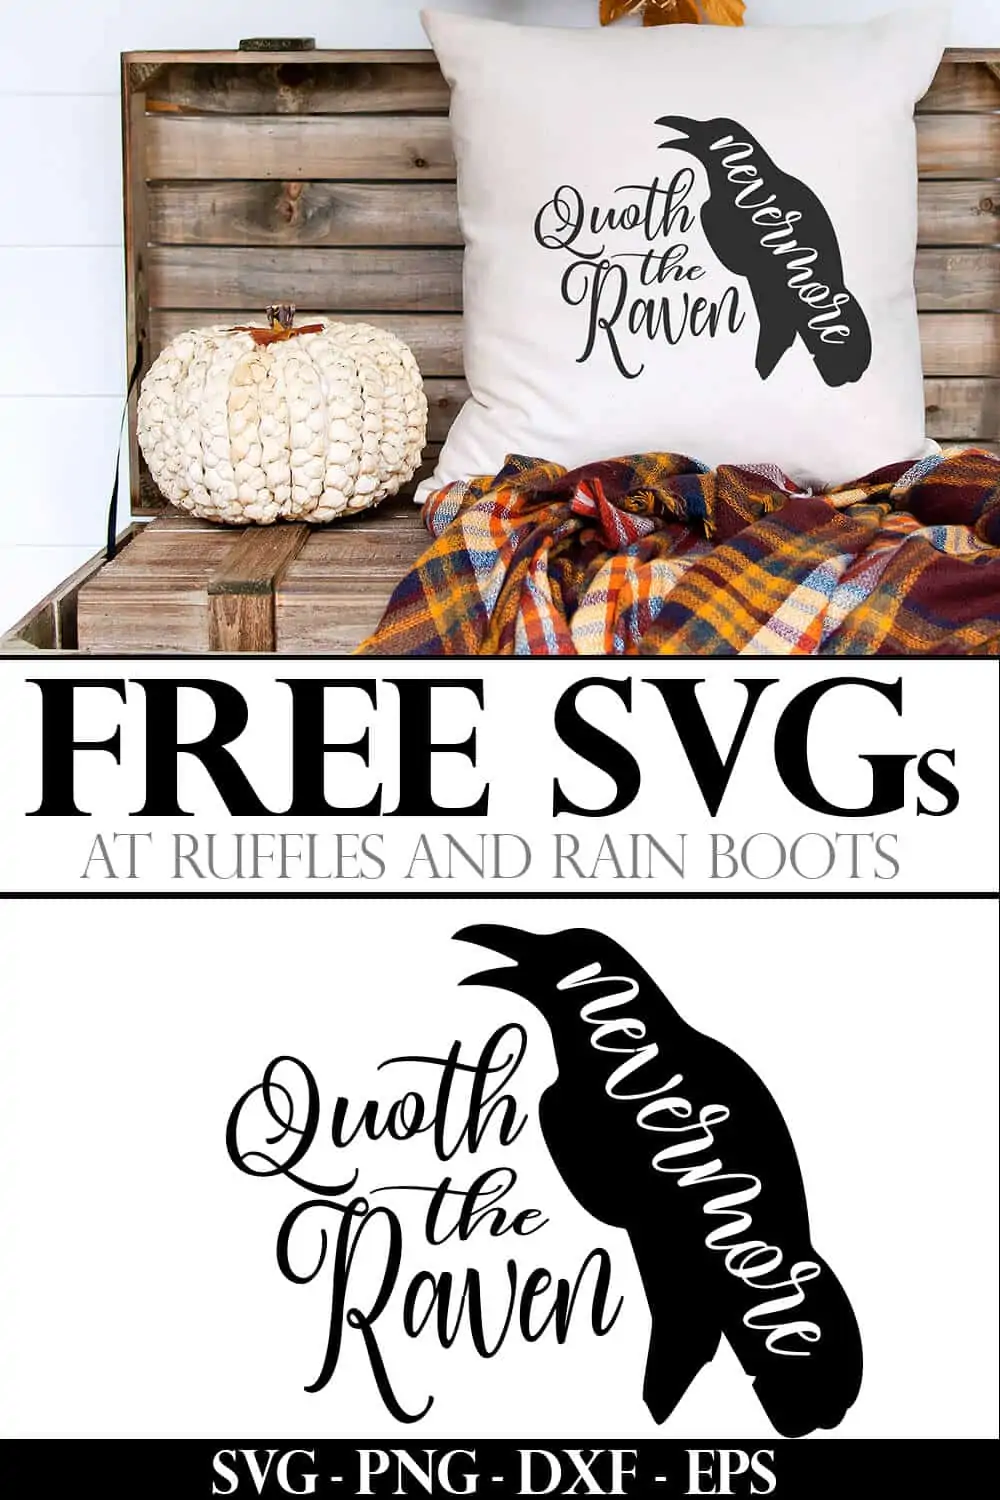 adorable and elegant quote the raven nevermore svg used on a white pillow propped on a fall scene with pumpkin and wooden trunk with text which reads free svg at ruffles and rain boots